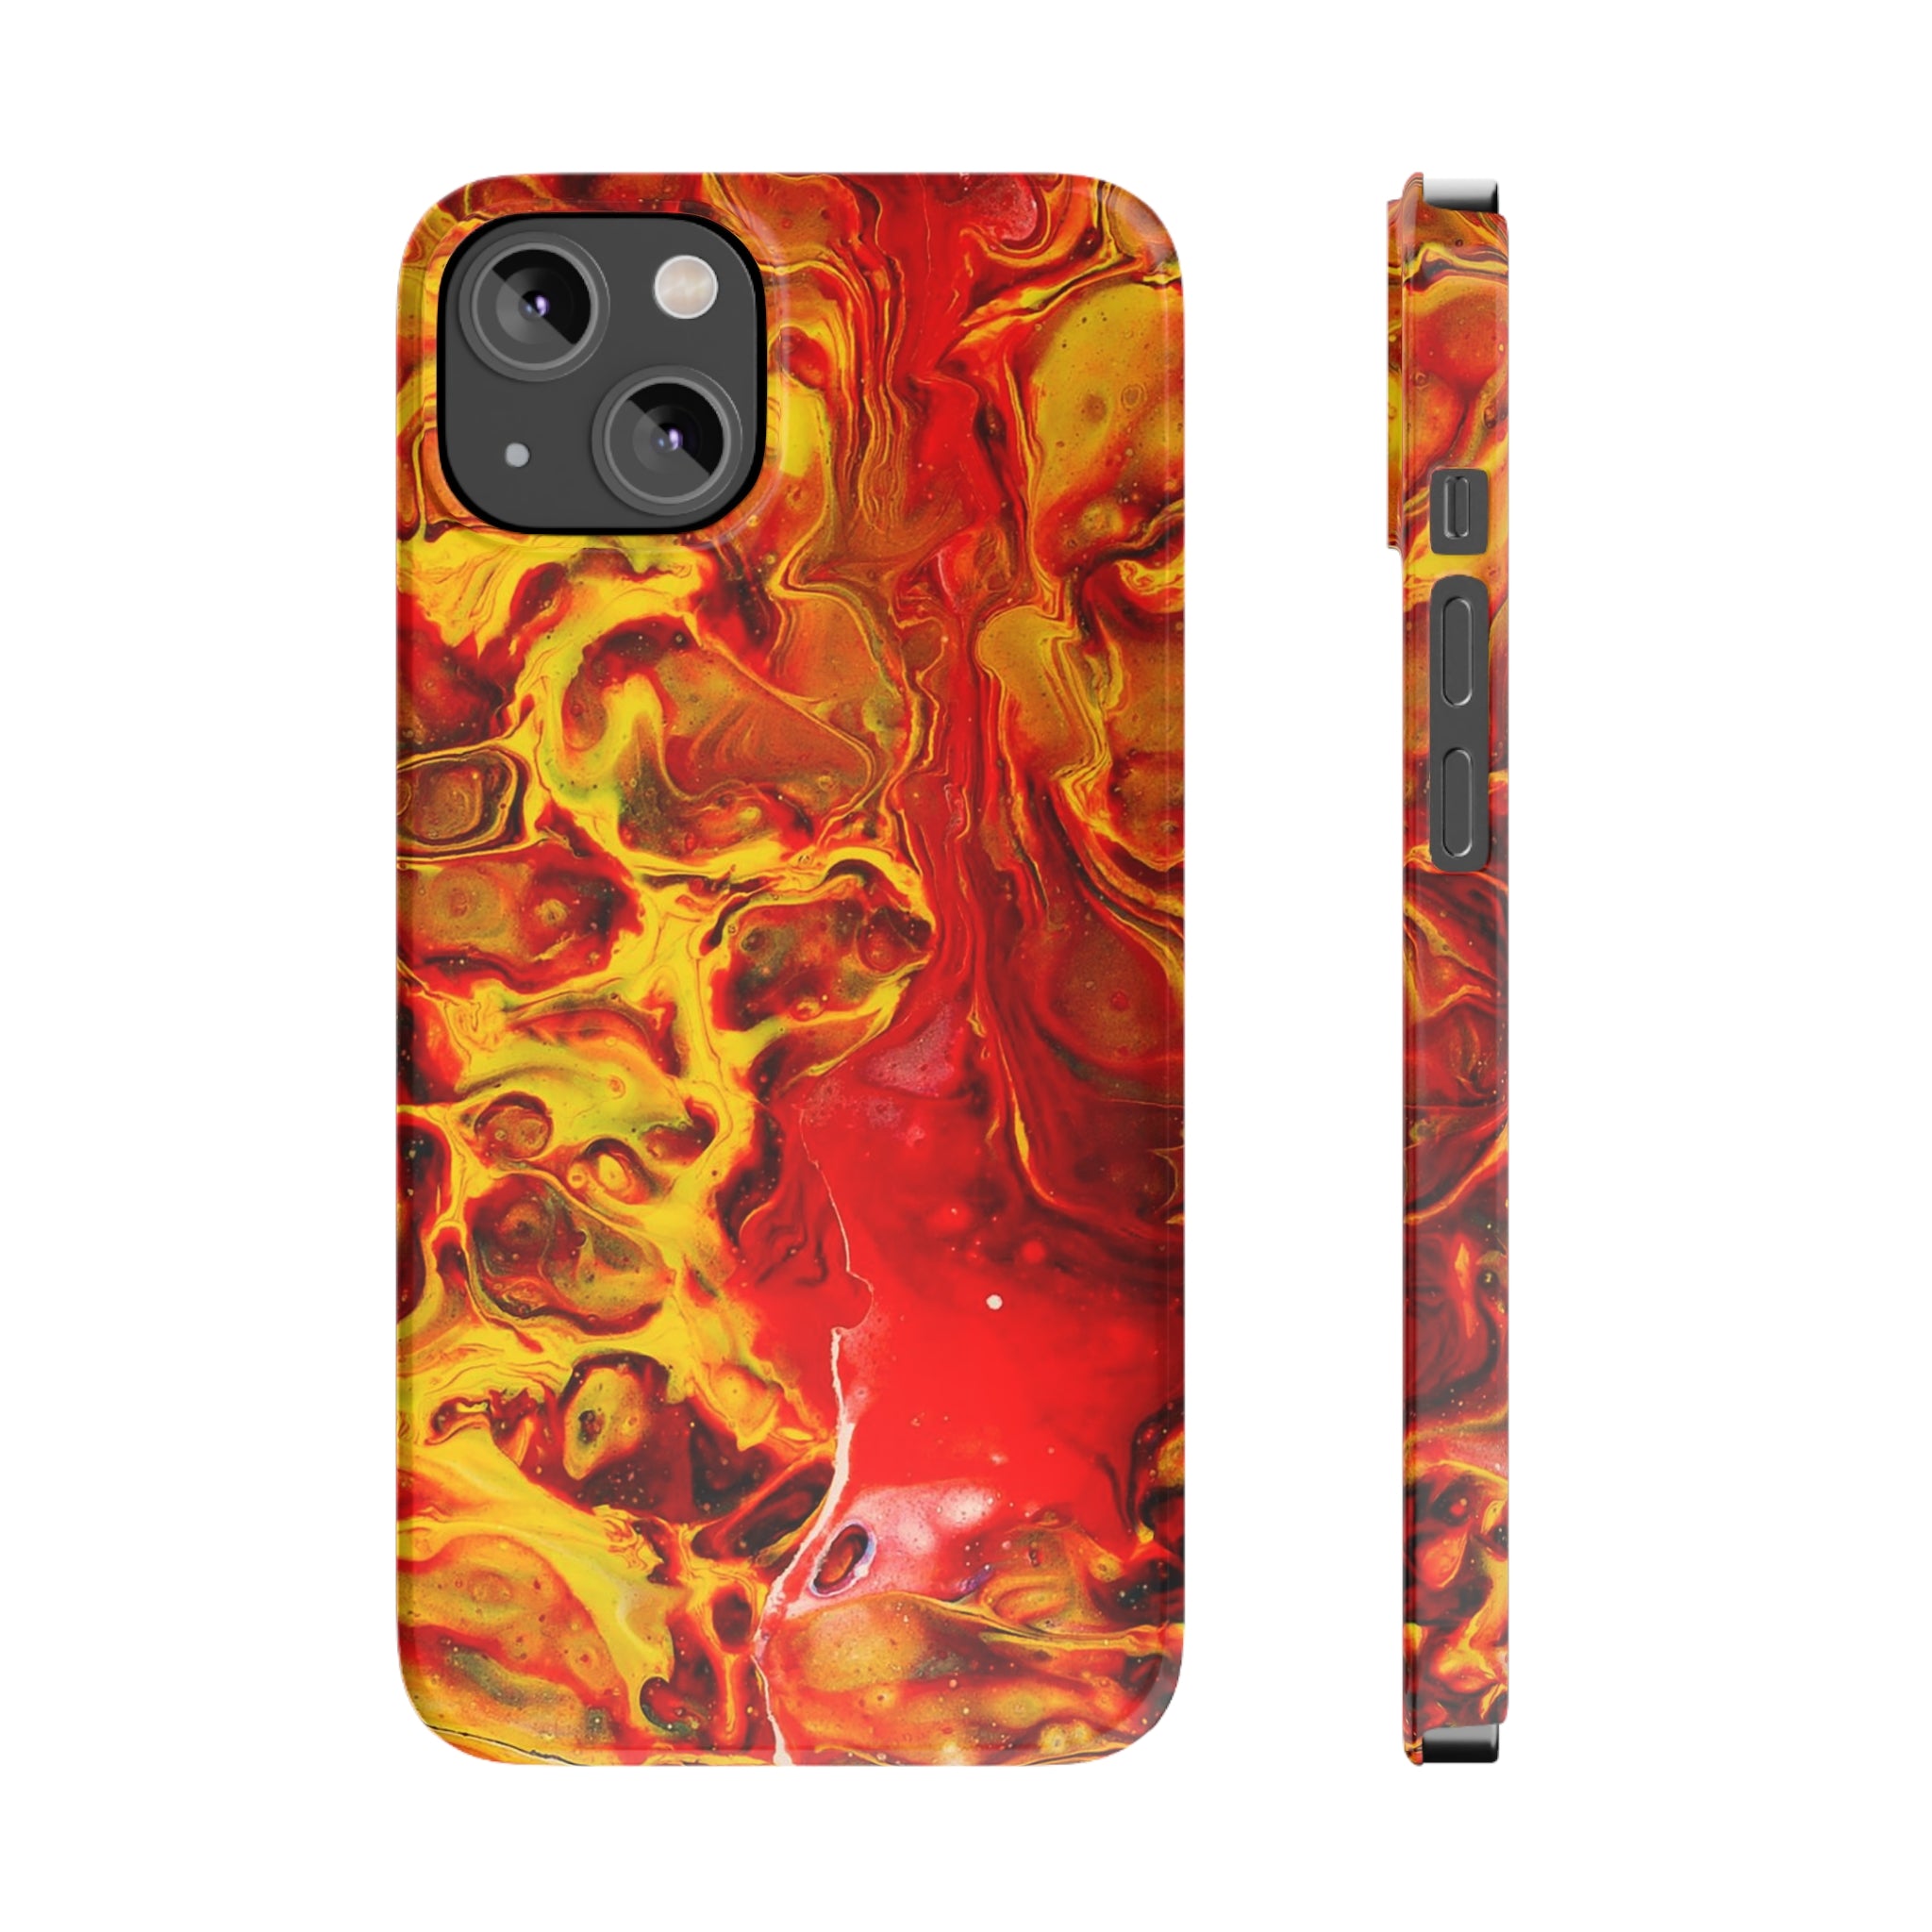 Fire Within - Slim Phone Cases